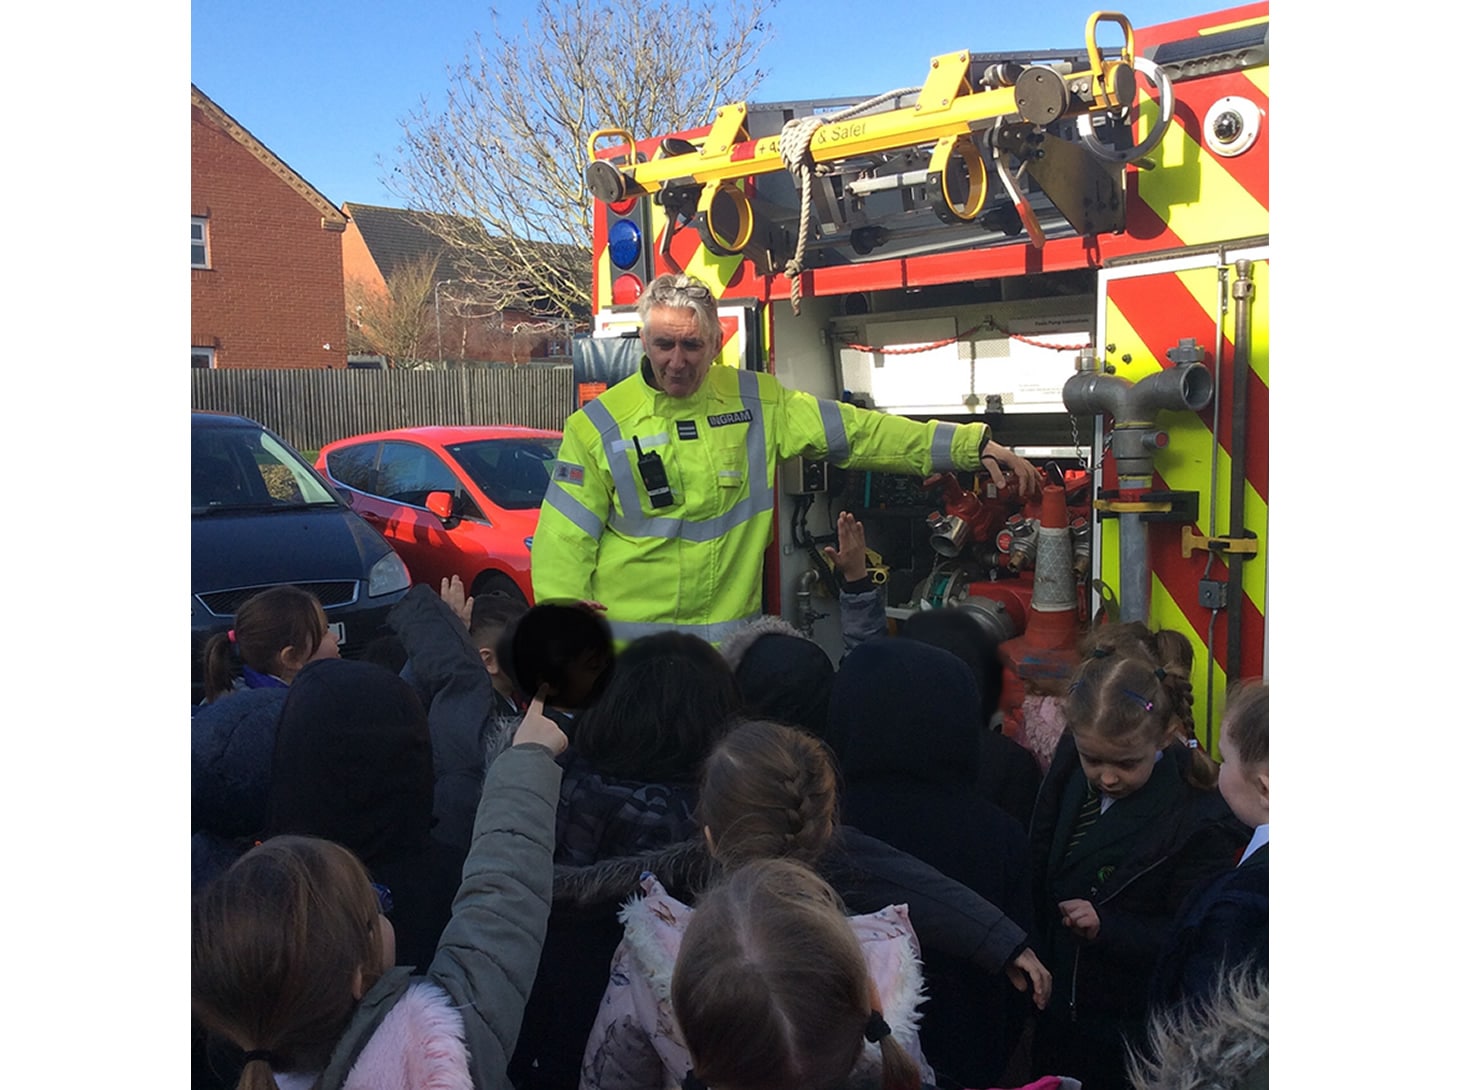 Firefighter showing pupils the fire engine